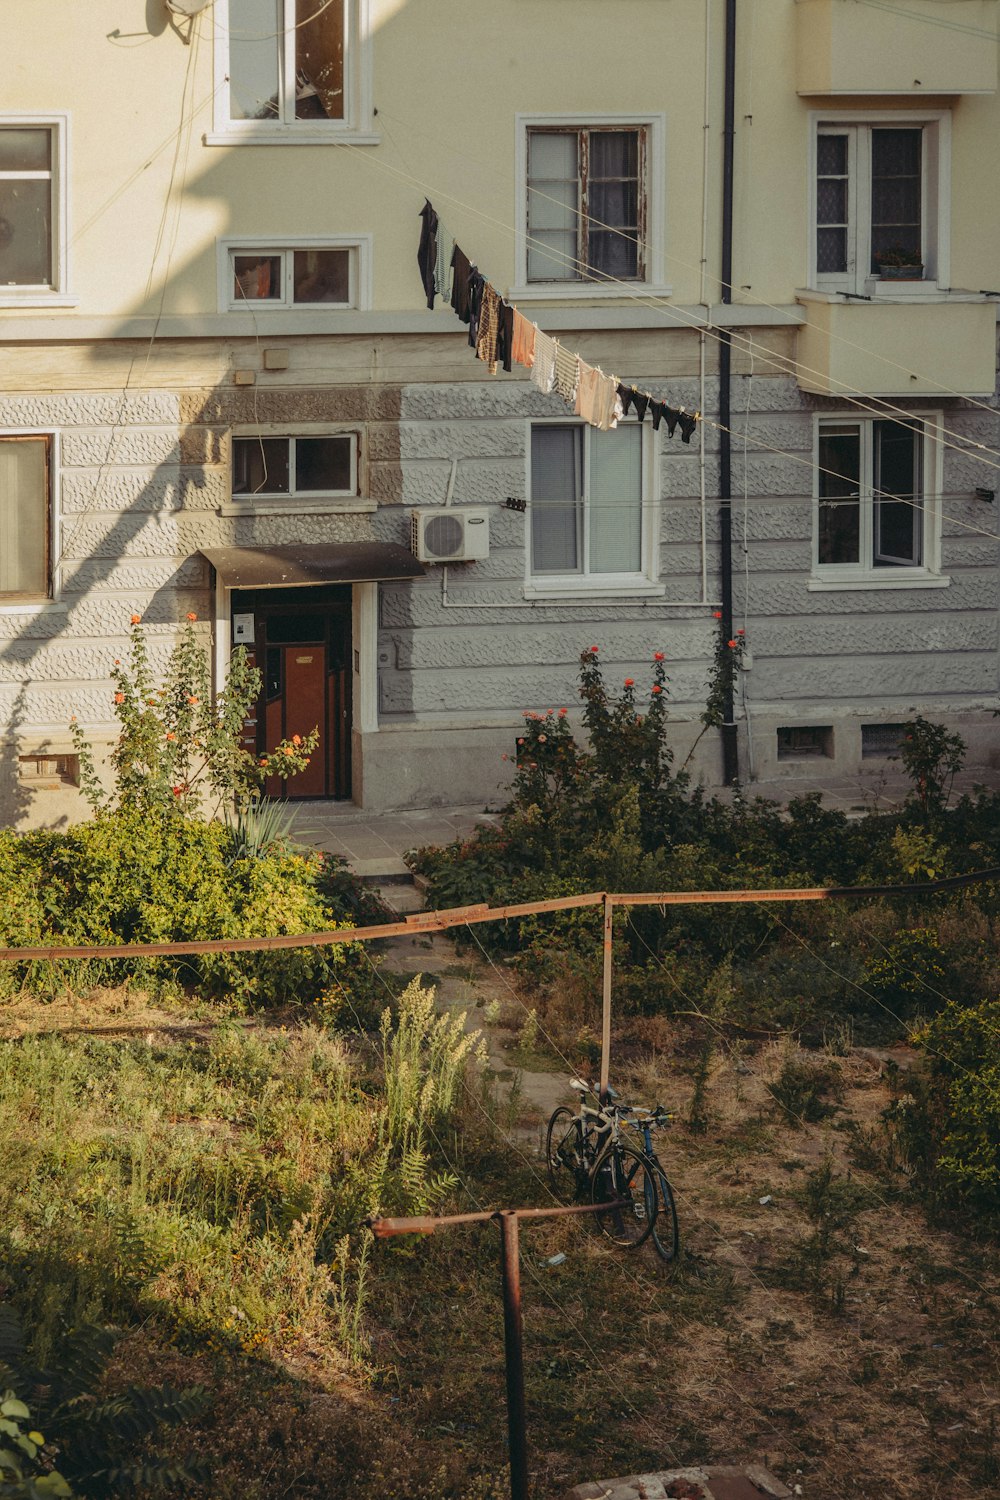 a bike is parked in front of a house